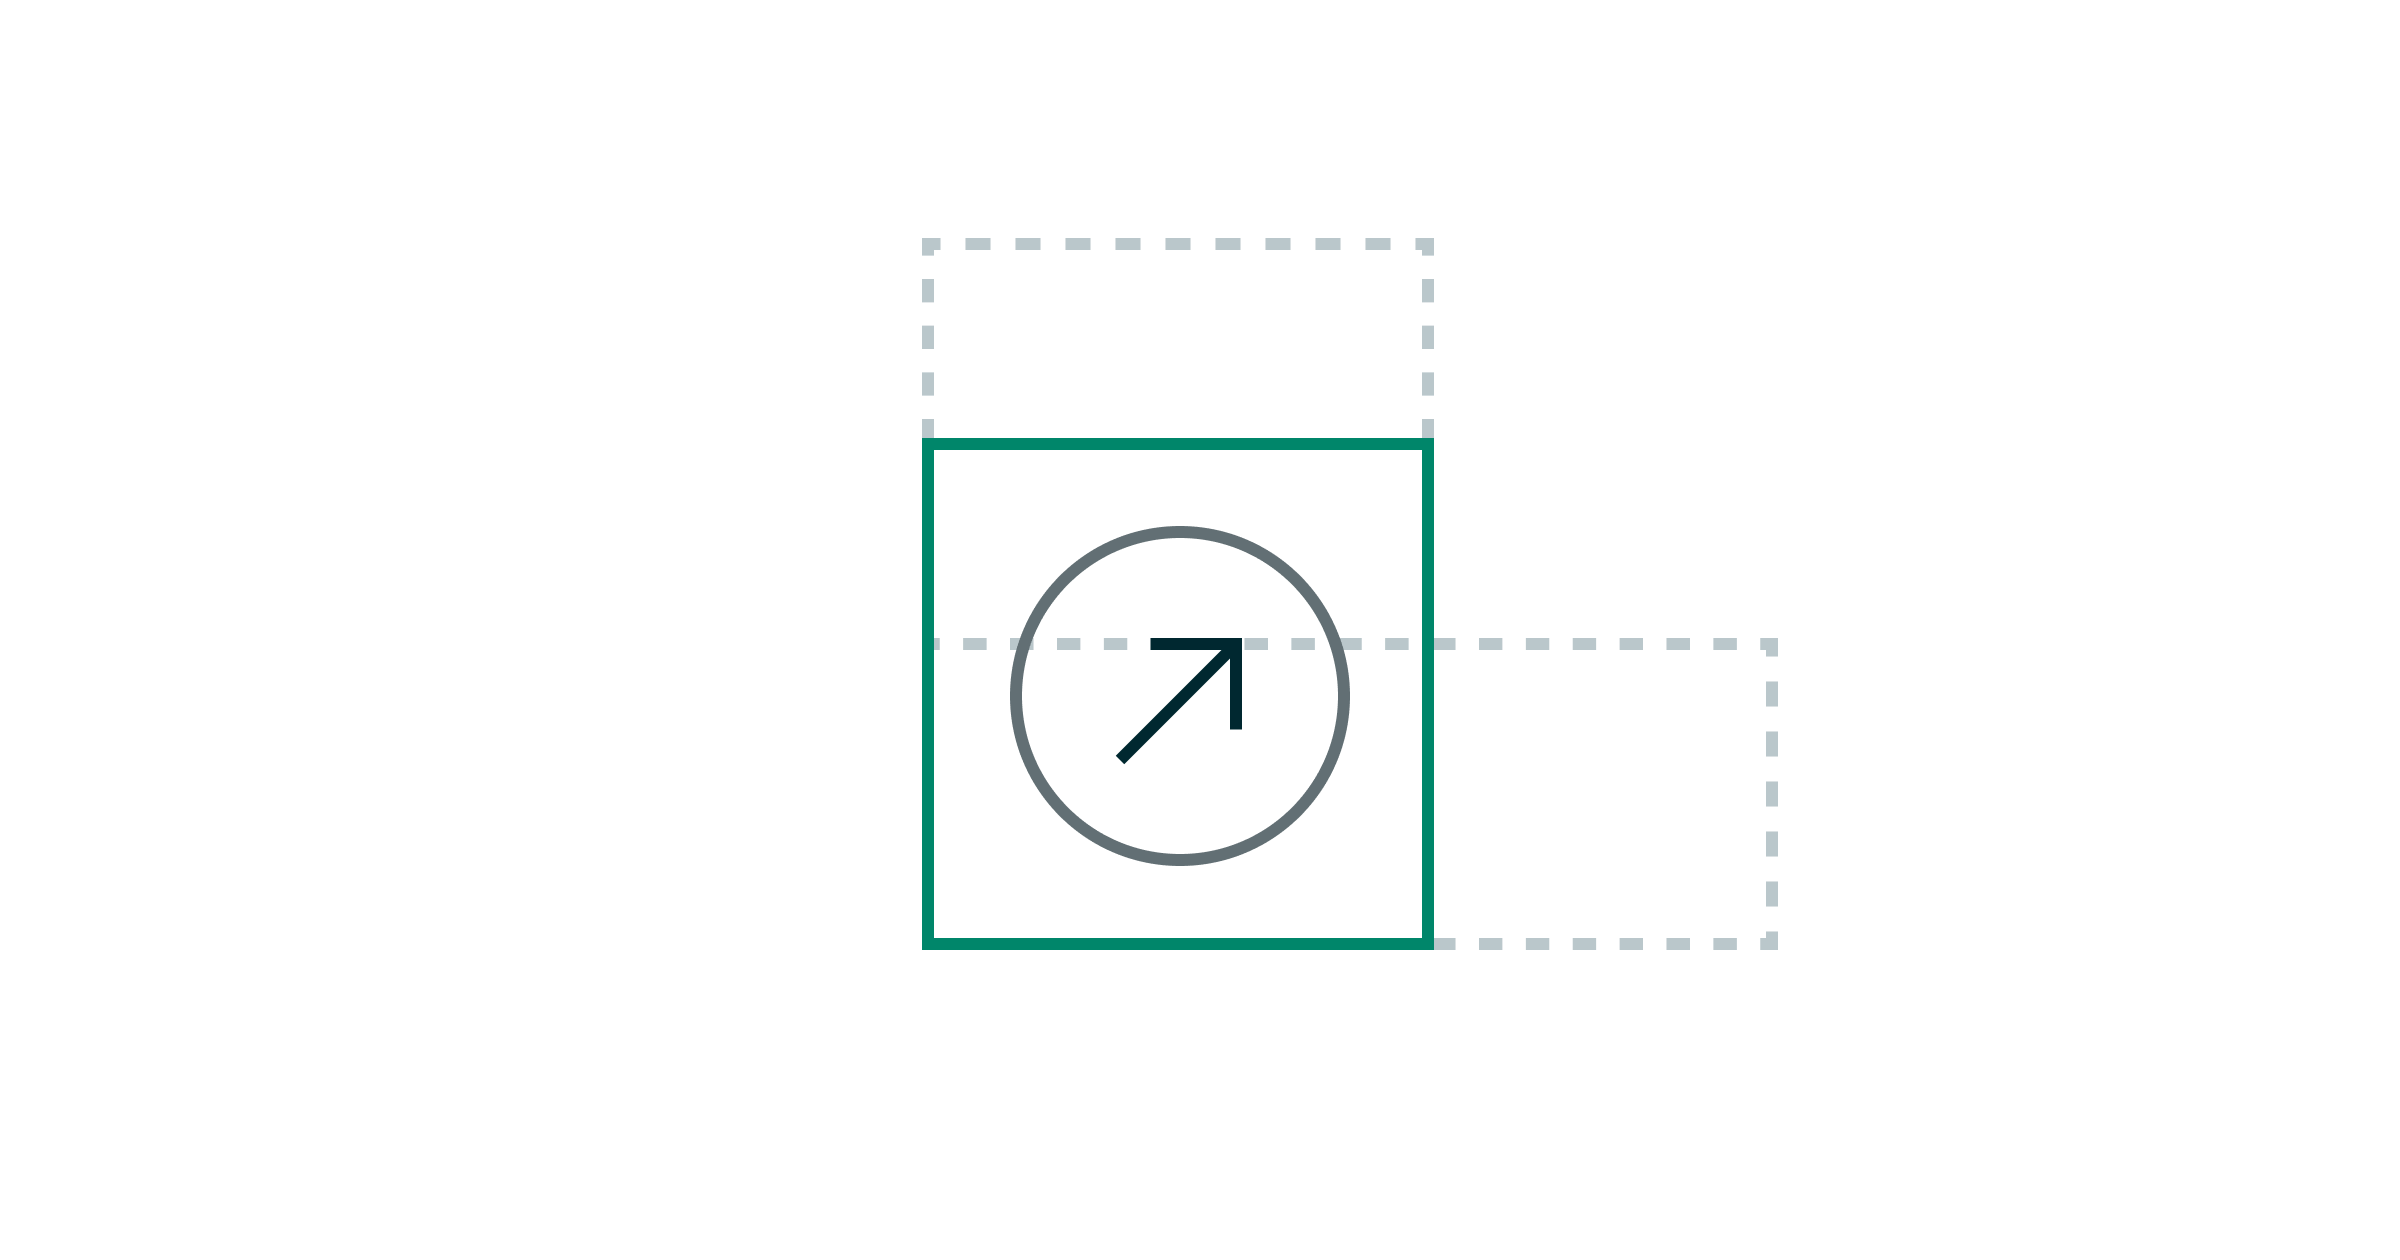 a transparent illustration of three squares joined by an arrow in a circle representing business adaptability